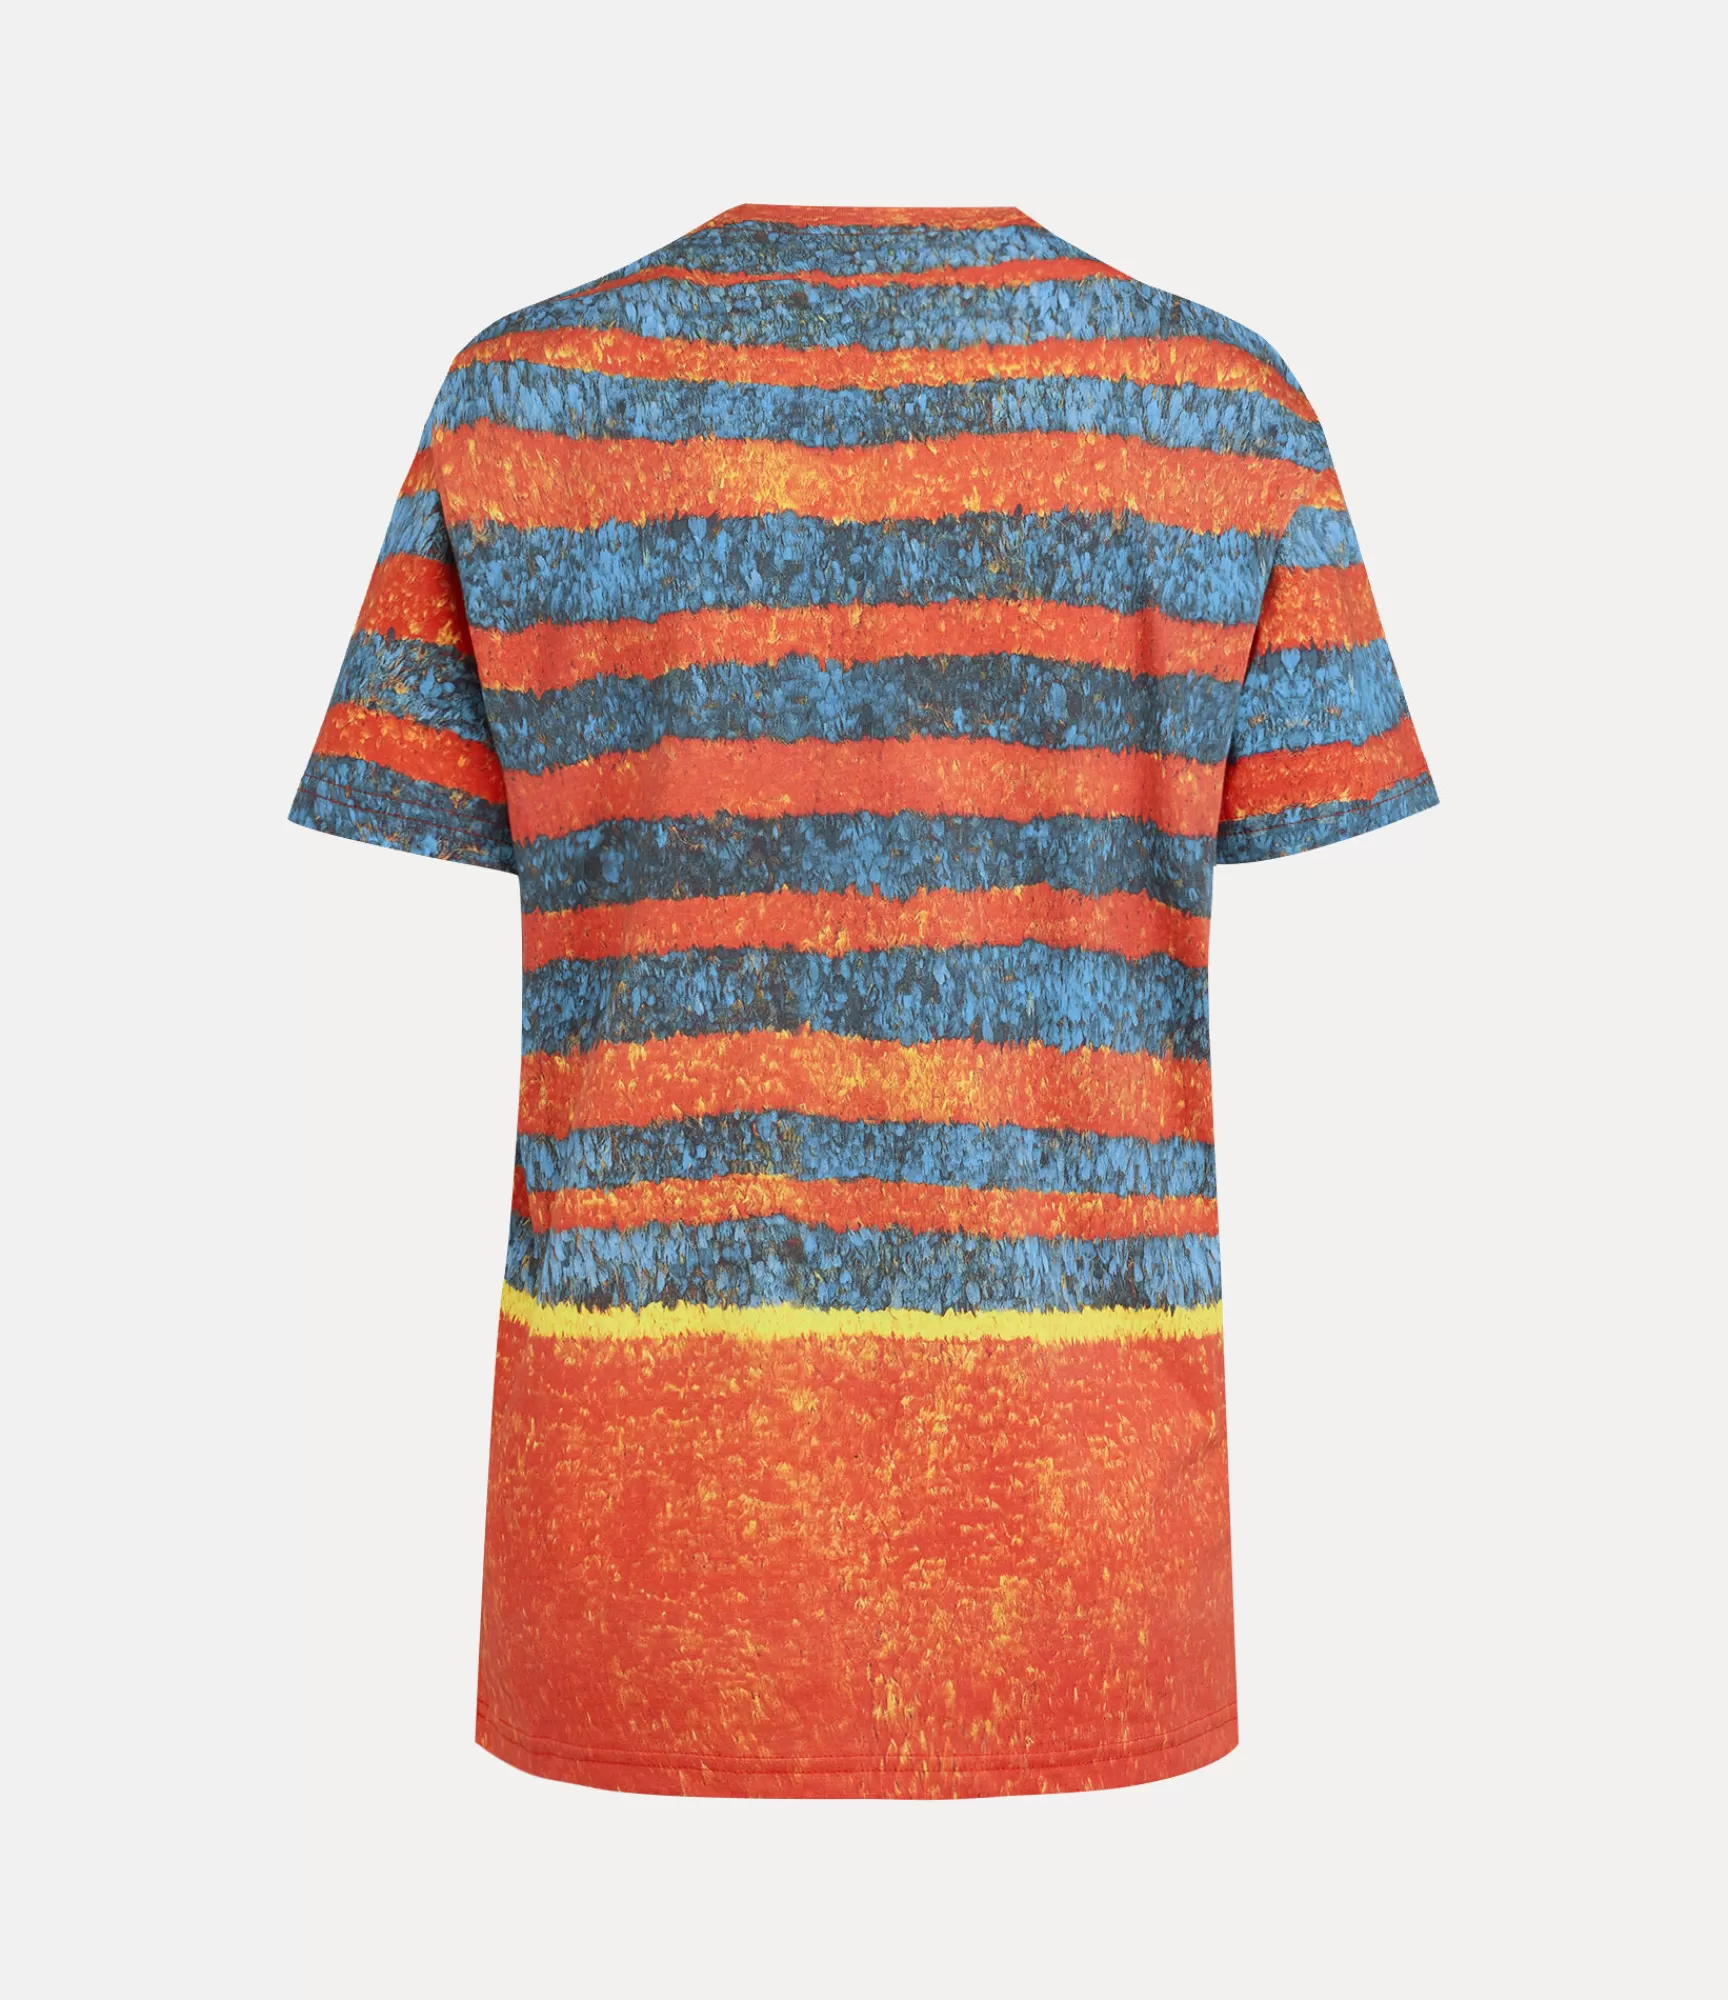 Vivienne Westwood T-Shirts and Polos | Sweatshirts and T-Shirts*Classic t-shirt Orange